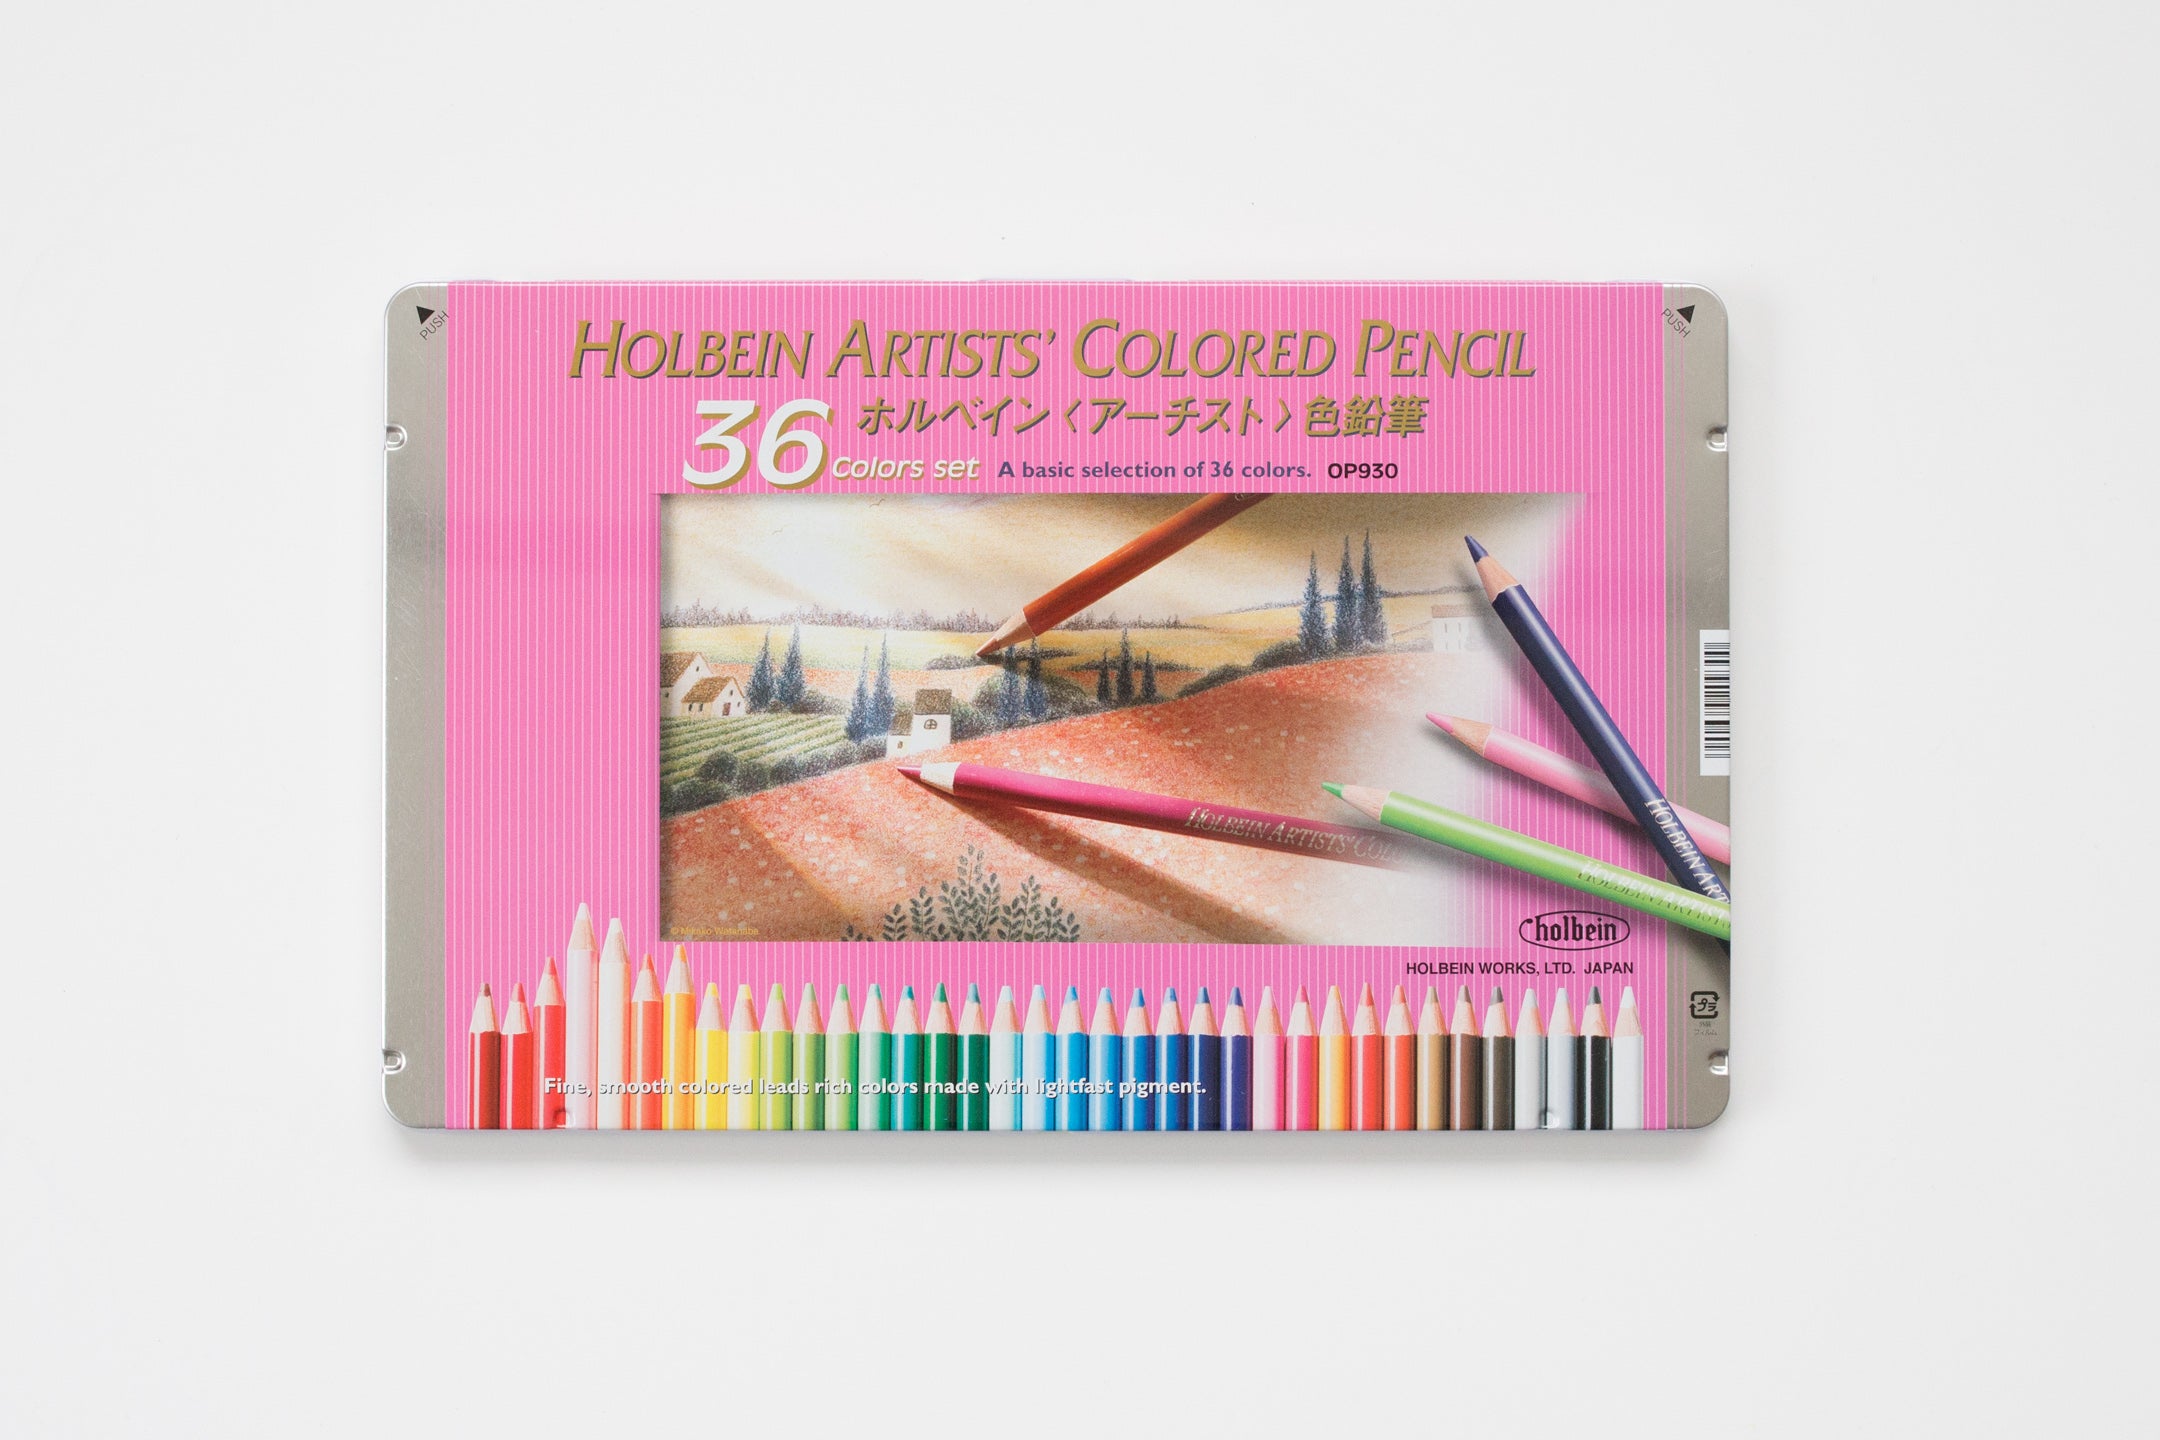 OP930 'Set 36 colors' Colored Pencil Holbein